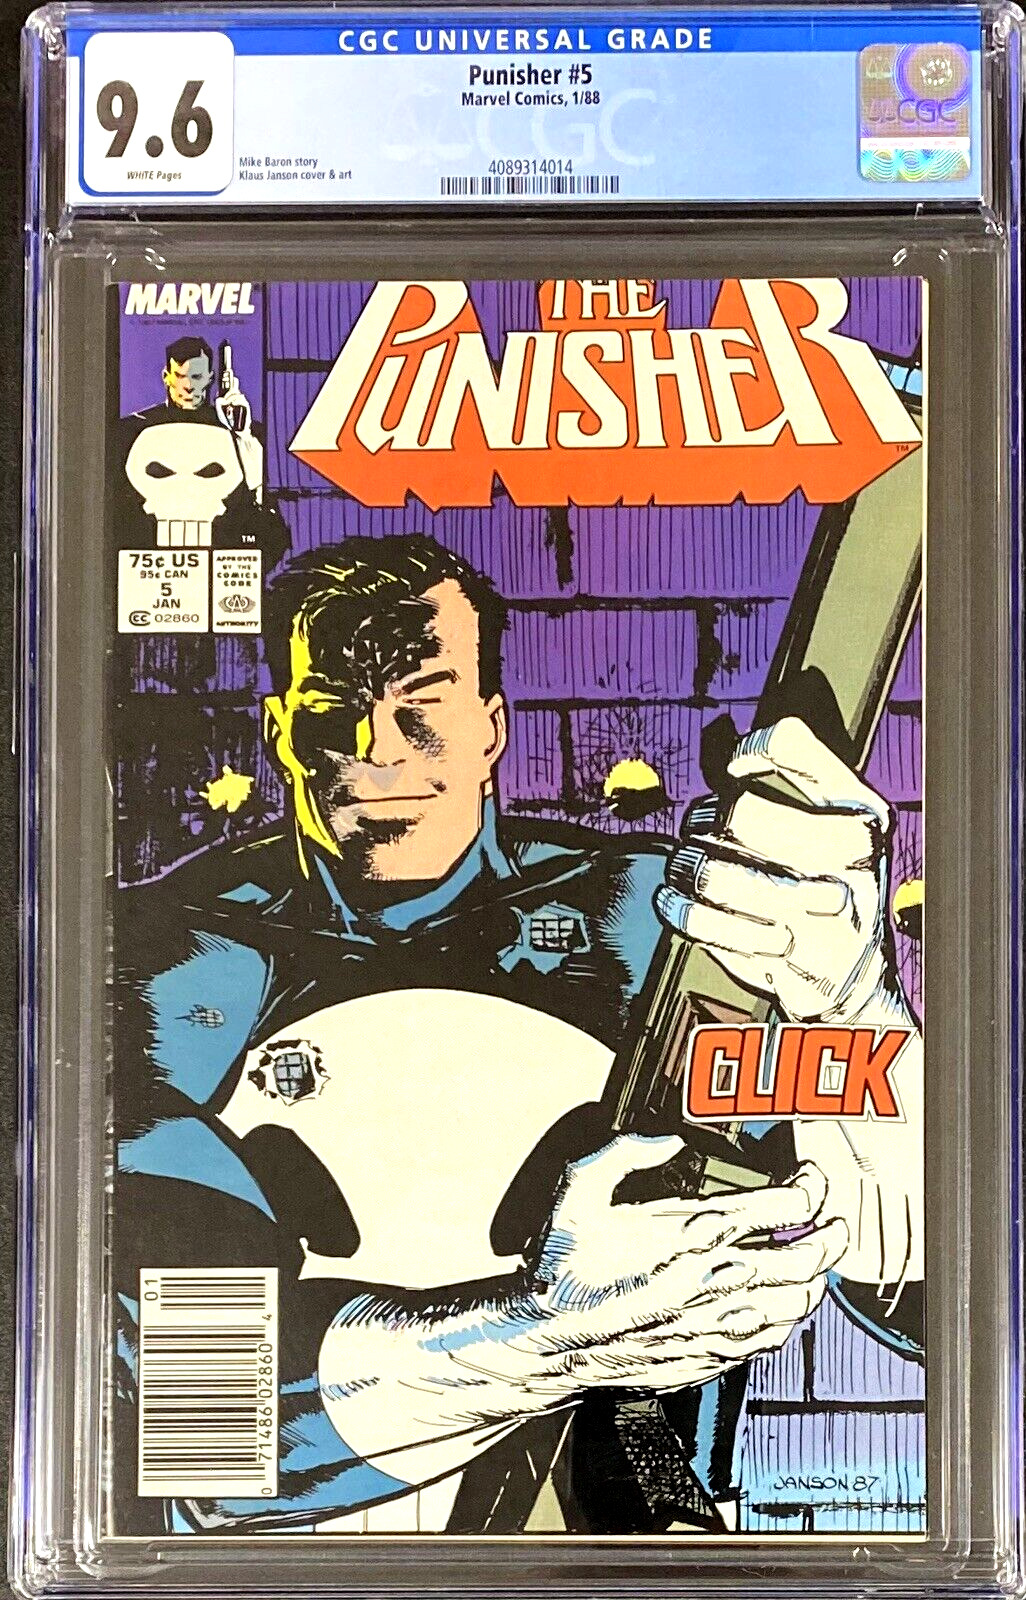 Punisher #5 1988 Newsstand Edition Klaus Janson Art and Cover CGC 9.6 NM+